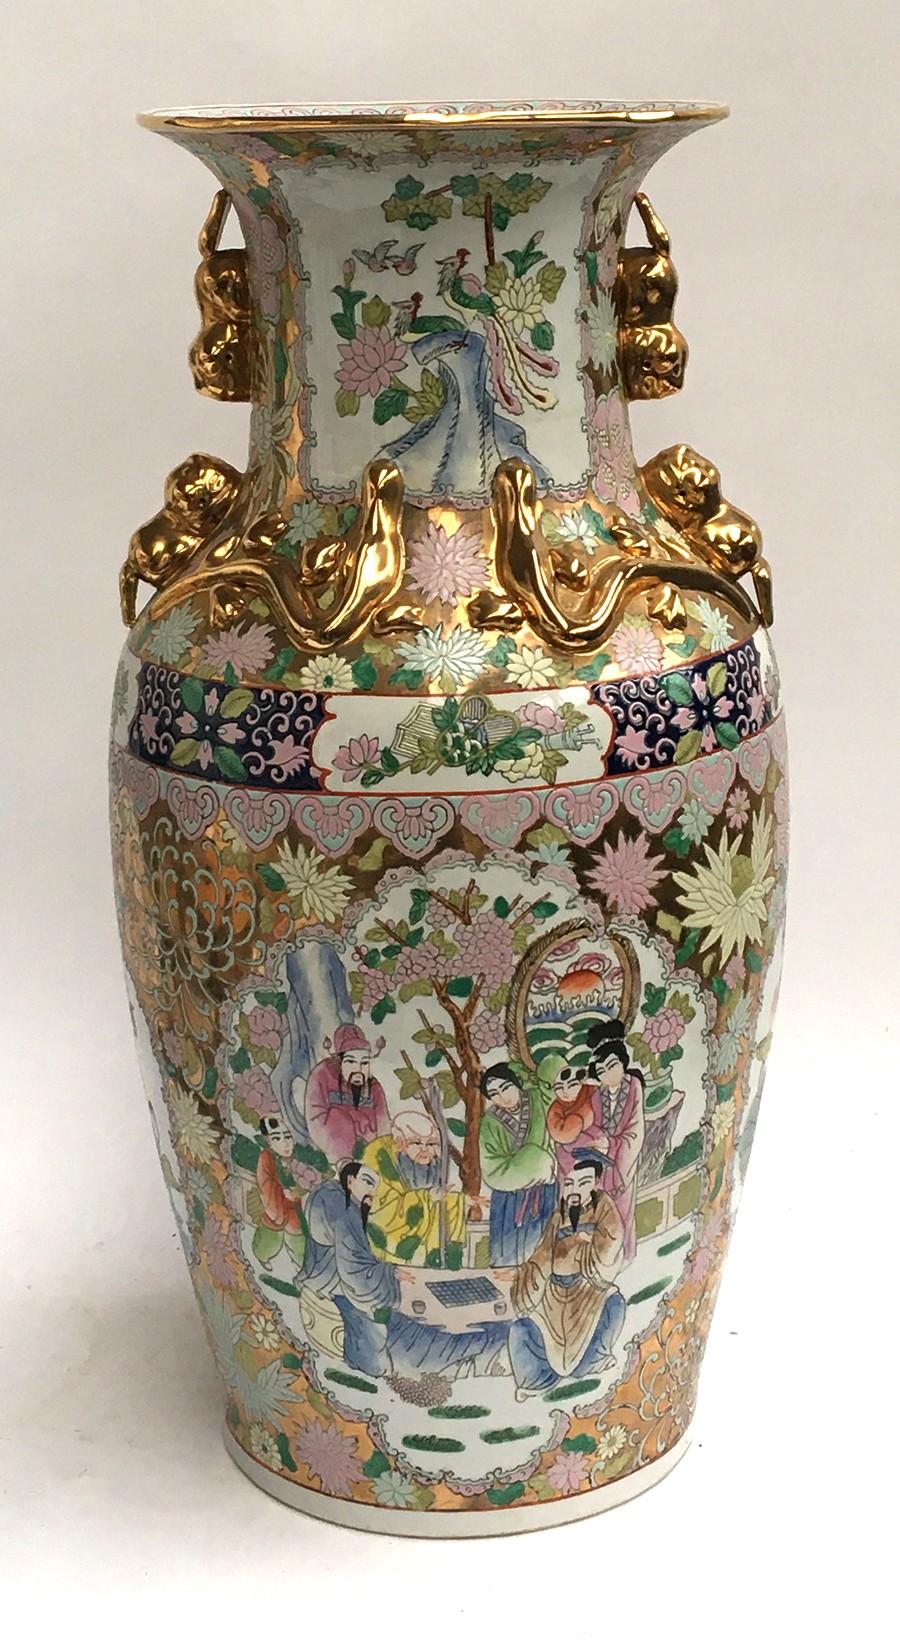 A large 20th century Chinese baluster vase, decorated with panels depicting lotus flowers and